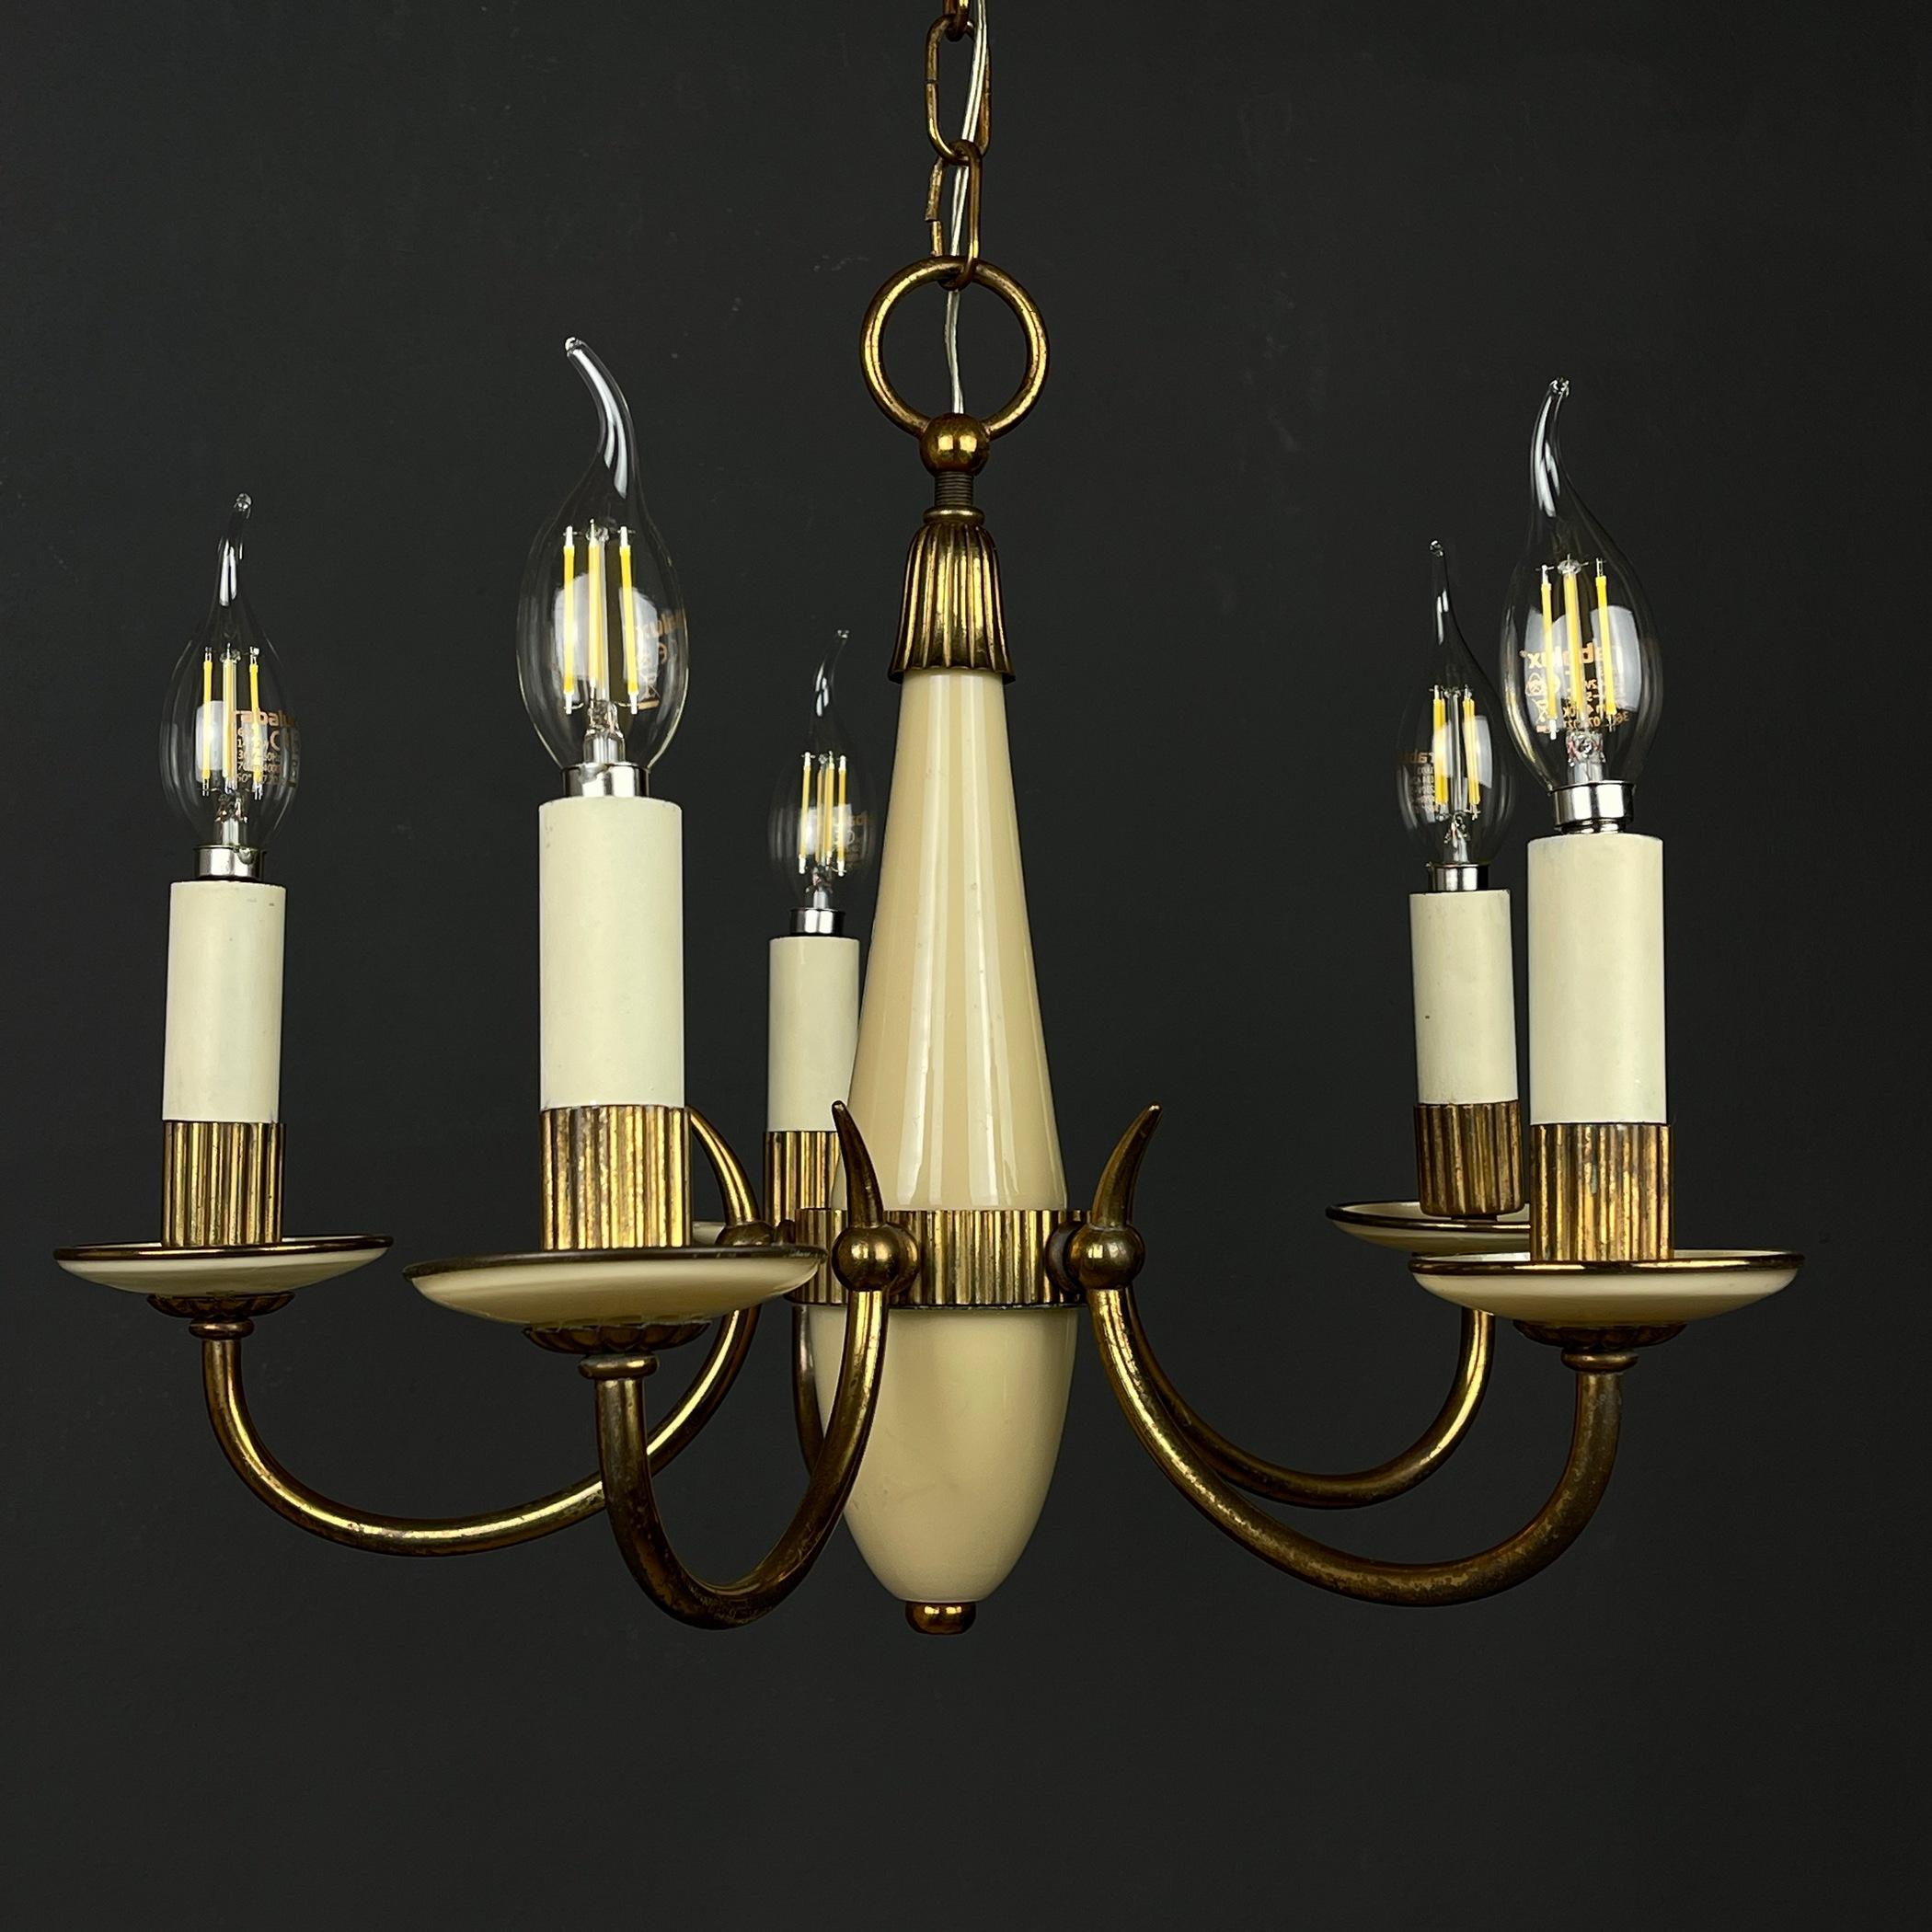 Illuminate your space with timeless charm through this exquisite vintage beige glass chandelier, lovingly crafted in Italy during the 1950s. This enchanting piece features 5 bronze arms adorned with delicate glass cups. In very good original